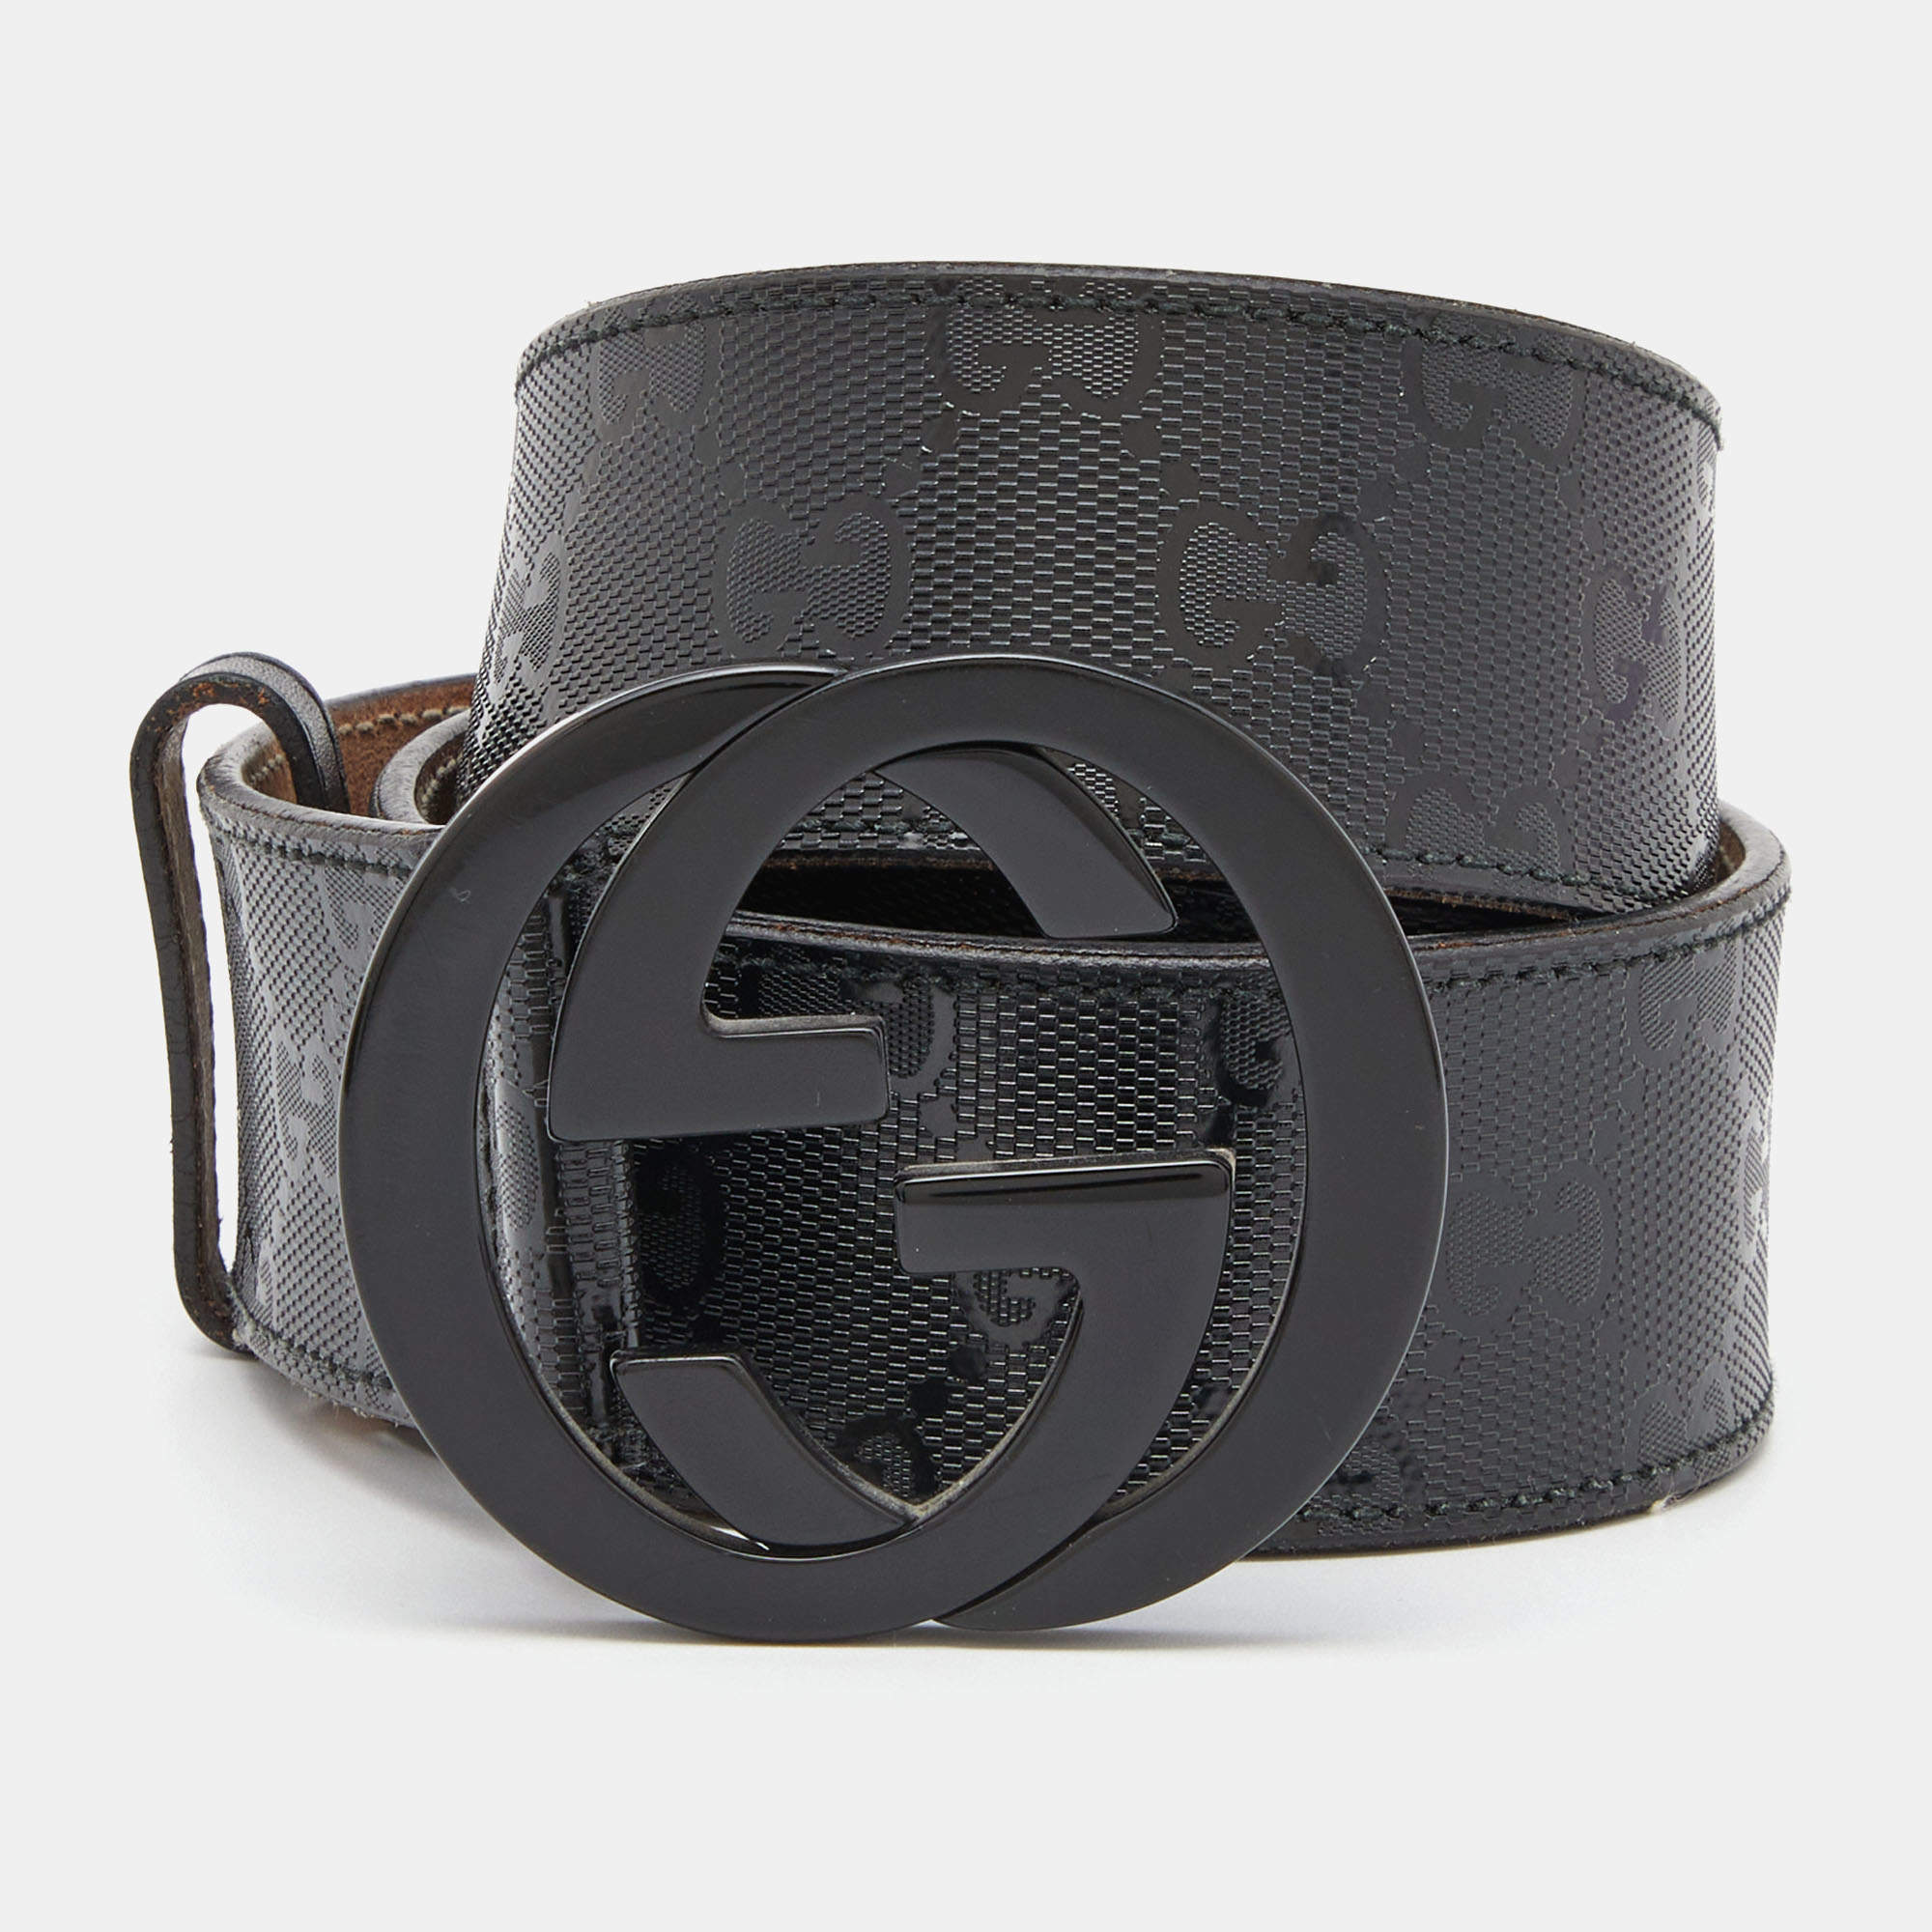 Louis Vuitton and Gucci belts size 32 - clothing & accessories